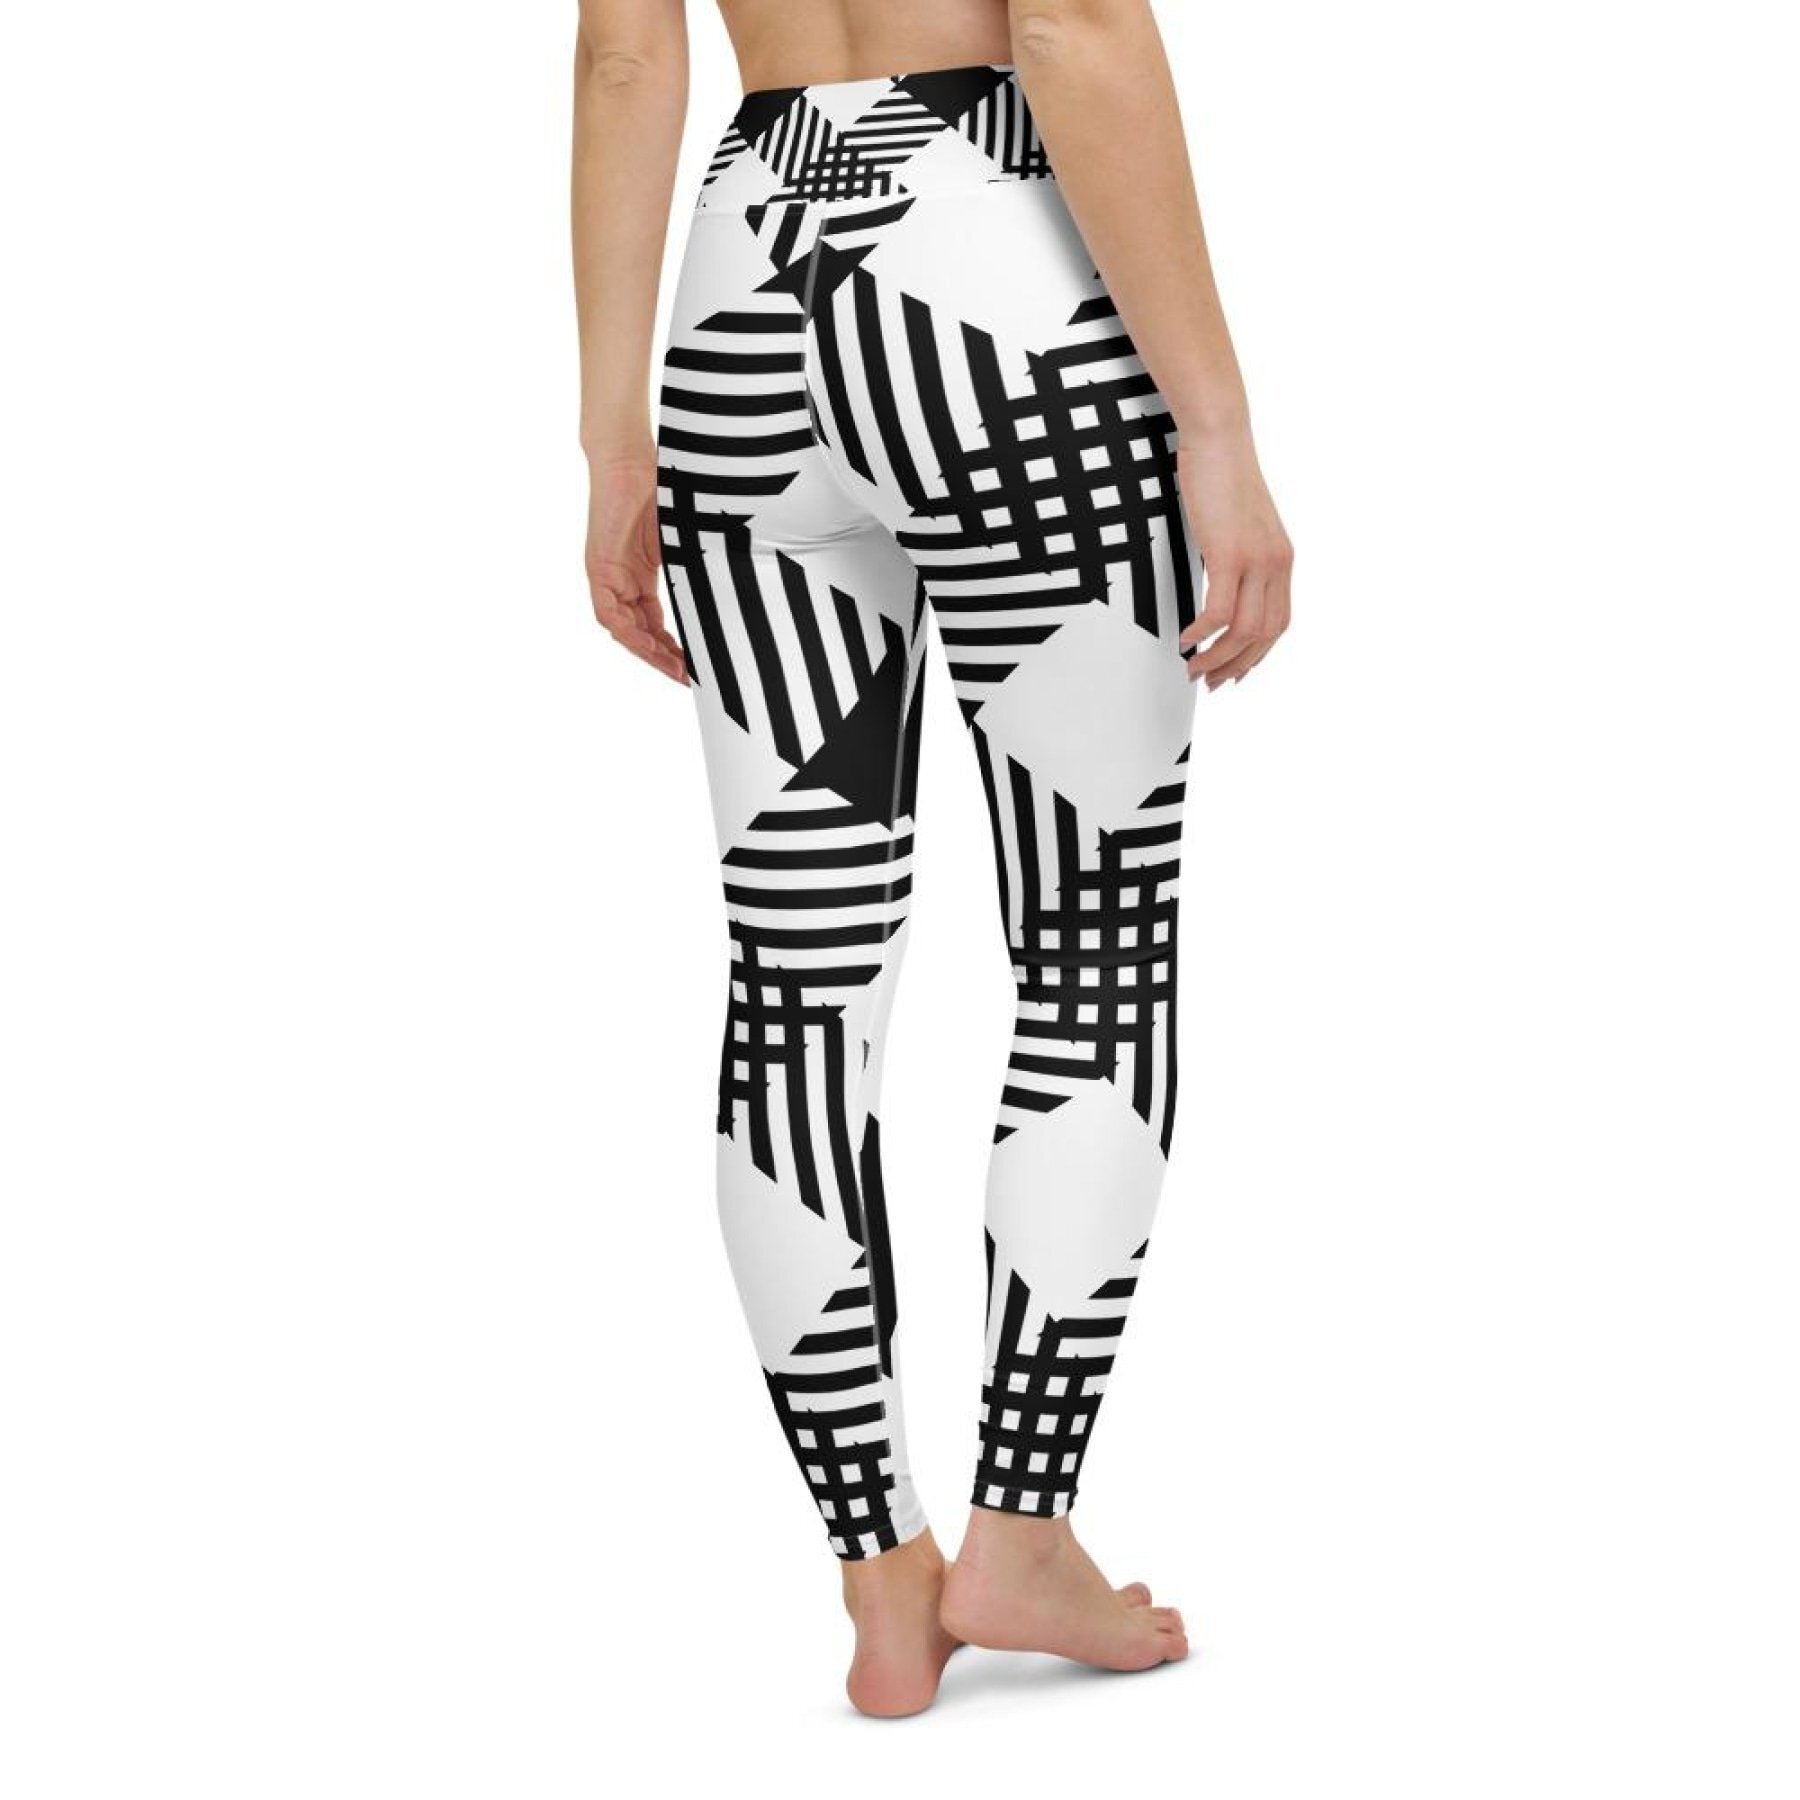 Womens Athletic Pants, Black And White Plaid Style High Waist Yoga Leggings  - Youarrived